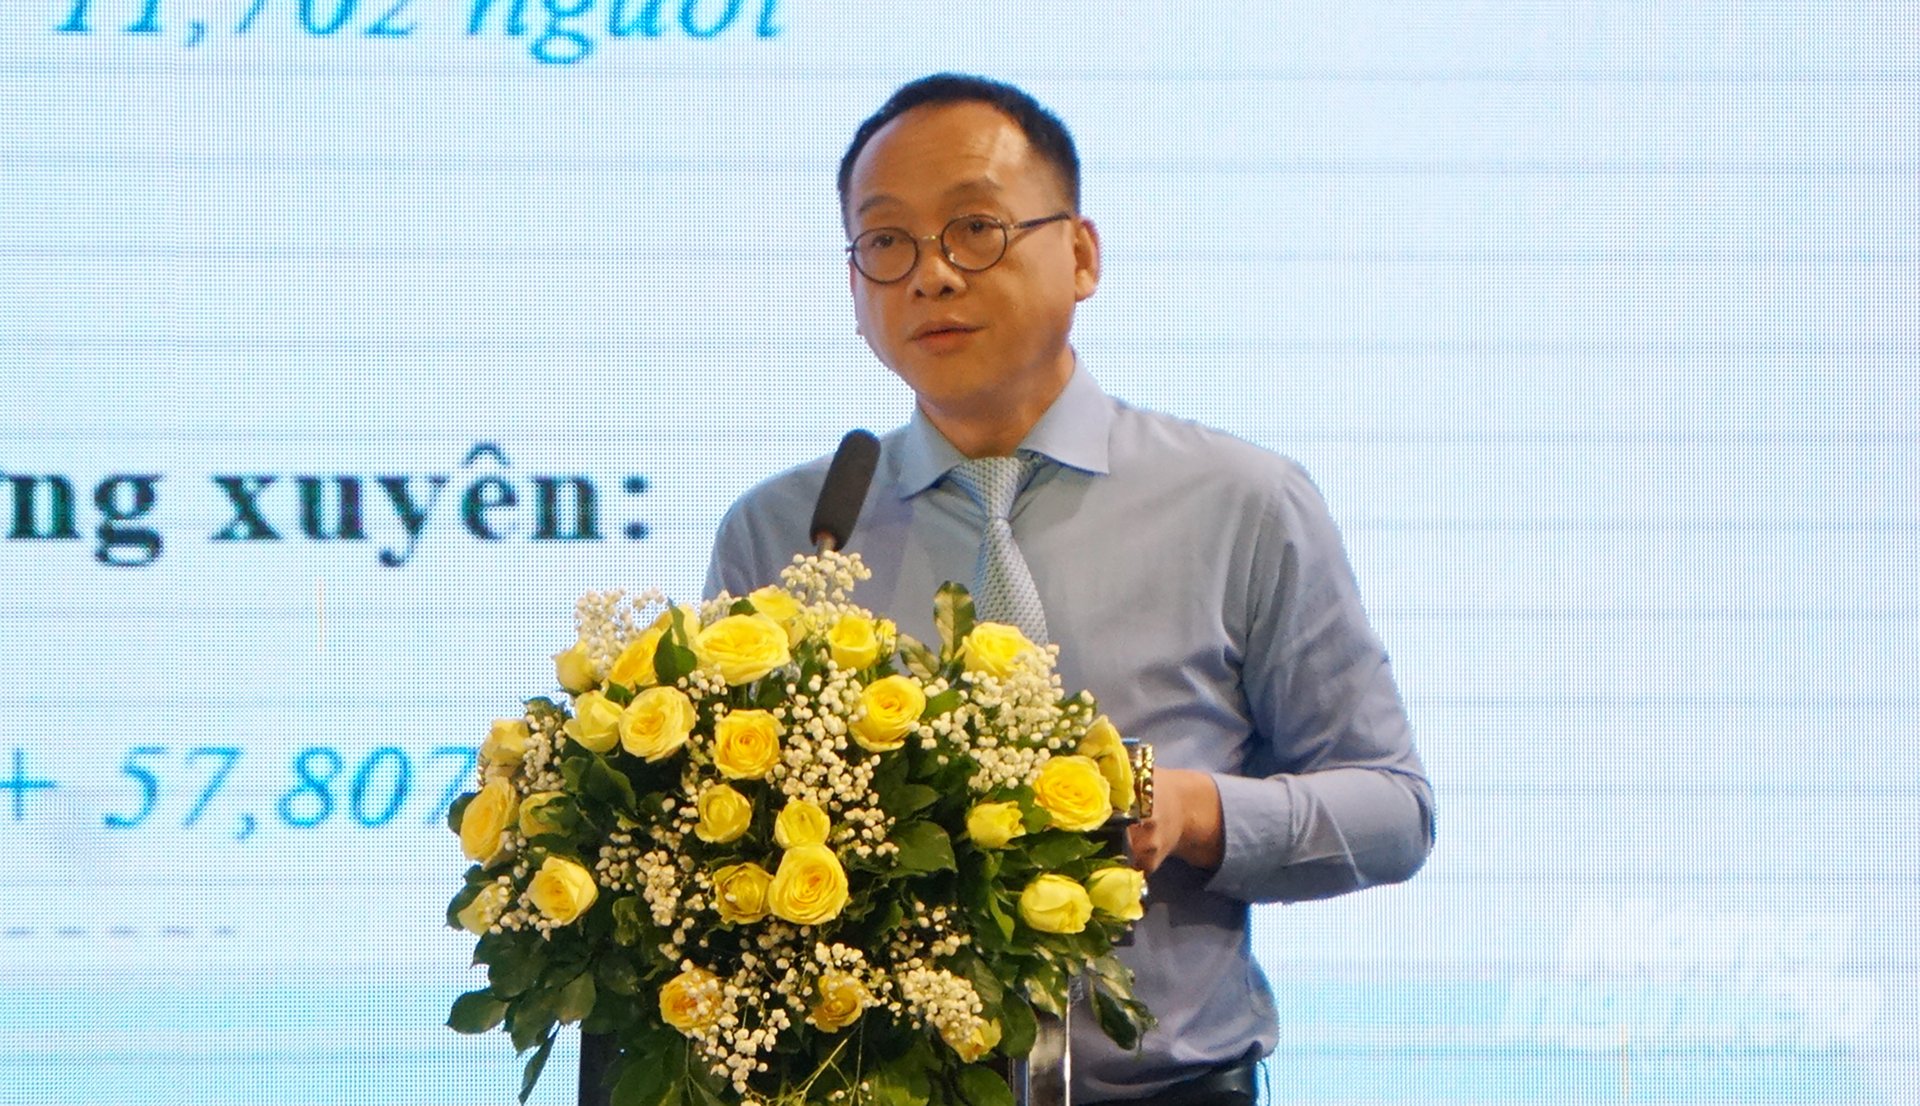 Mr. Ngo Hong Giang, Head of Organization and Personnel Department, MARD. Photo: Nguyen Thuy.